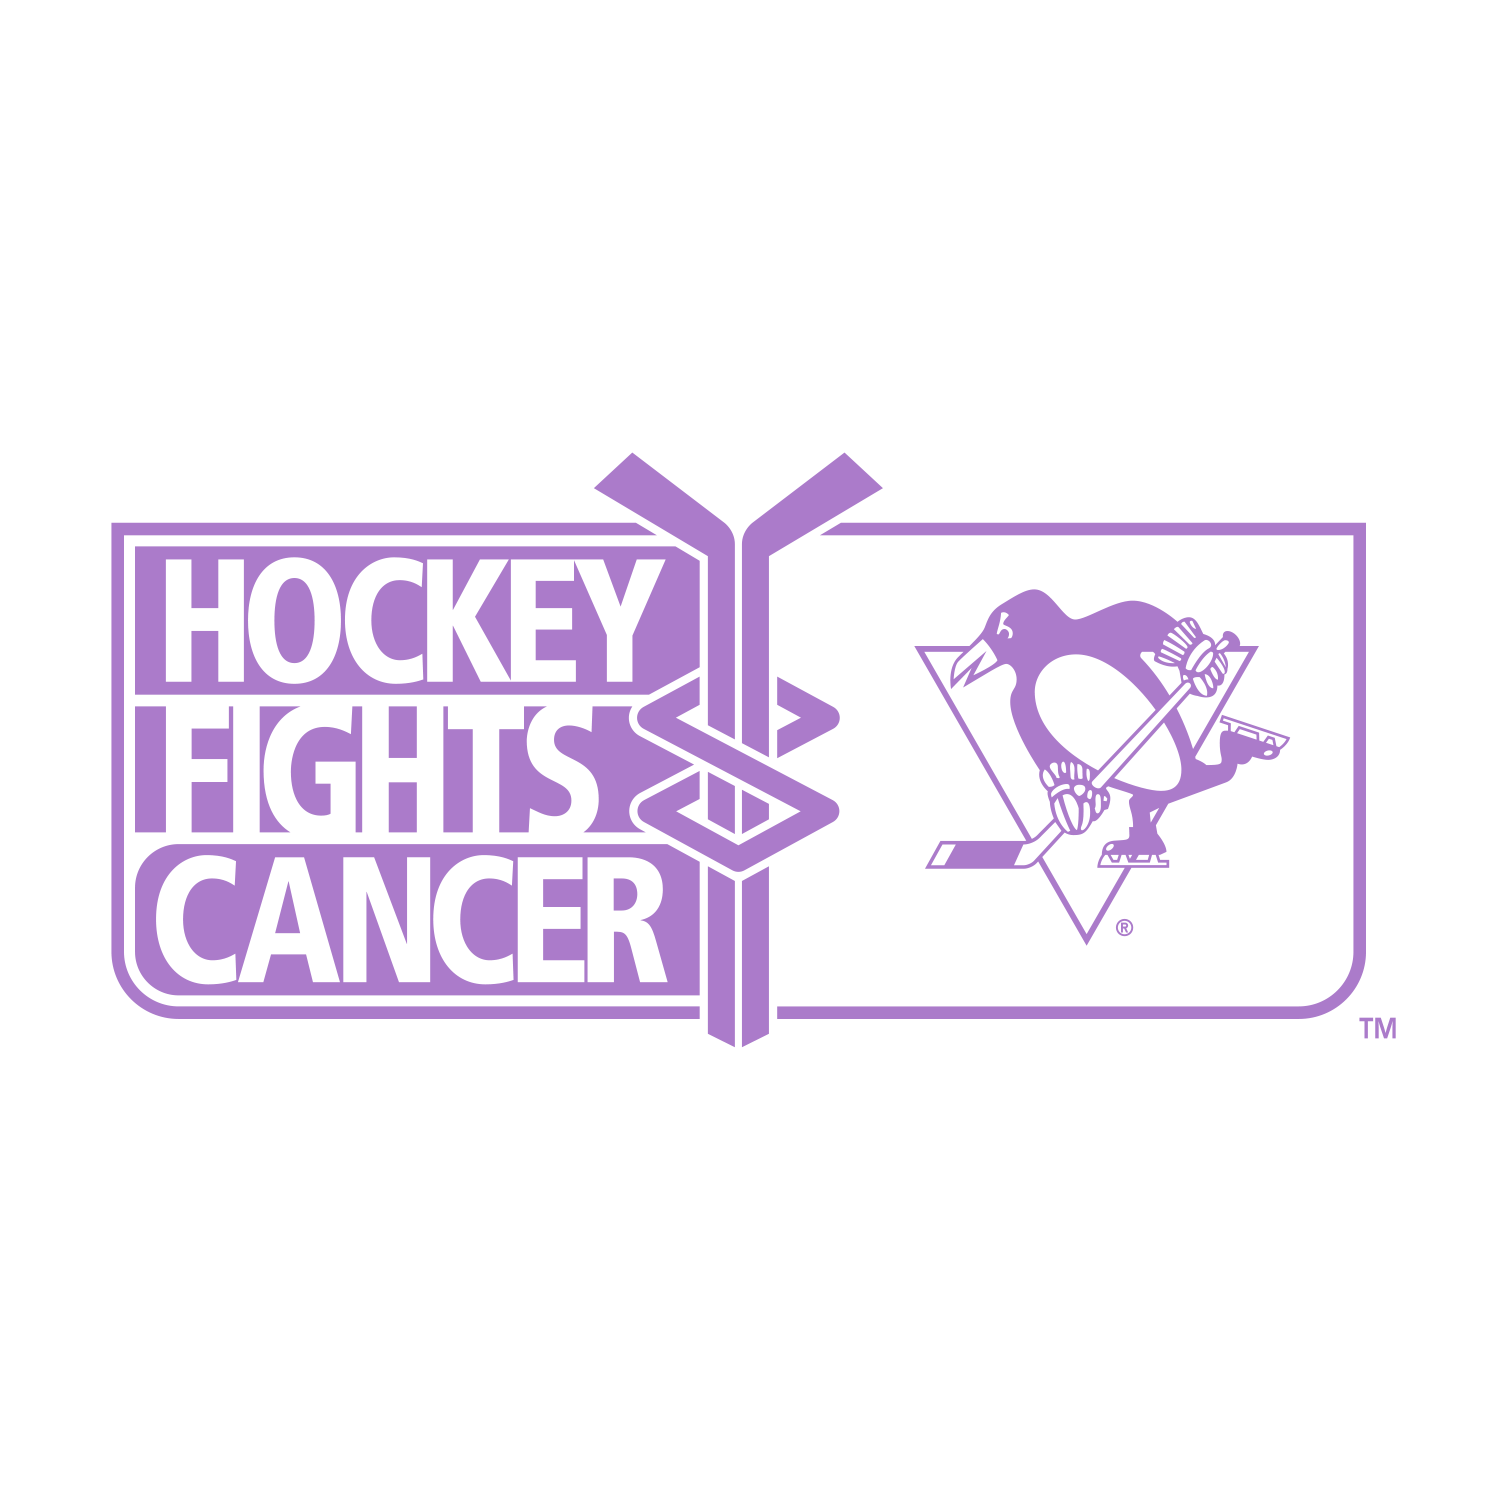 Pittsburgh Penguins - Learn more about Hockey Fights Cancer month